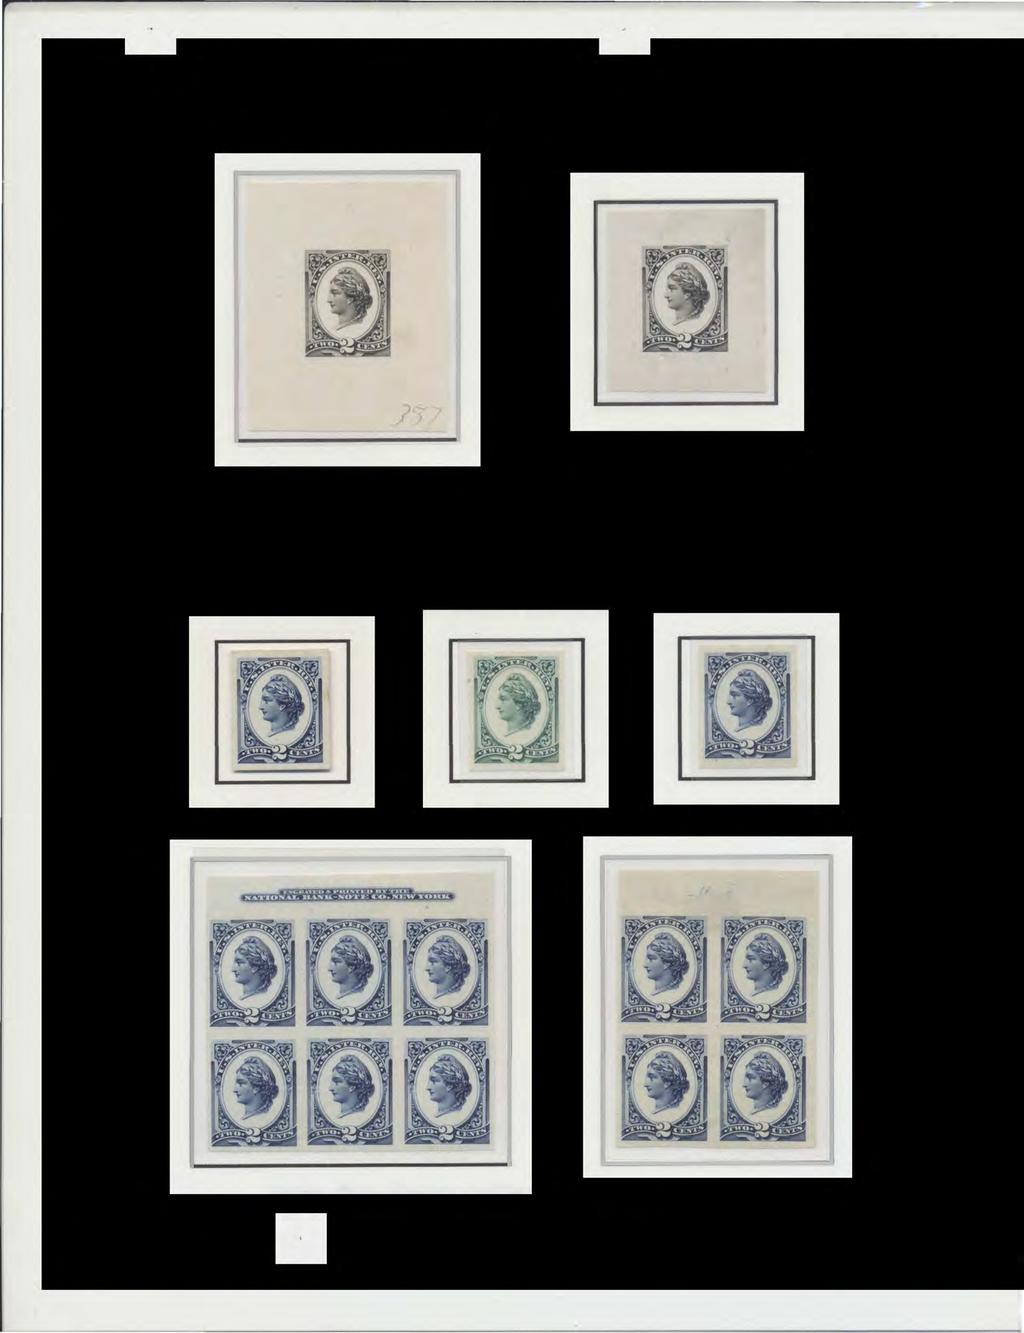 to the exhibitor (ex-joyce) Plate Proofs on India National Bank Note Co. N.Y.